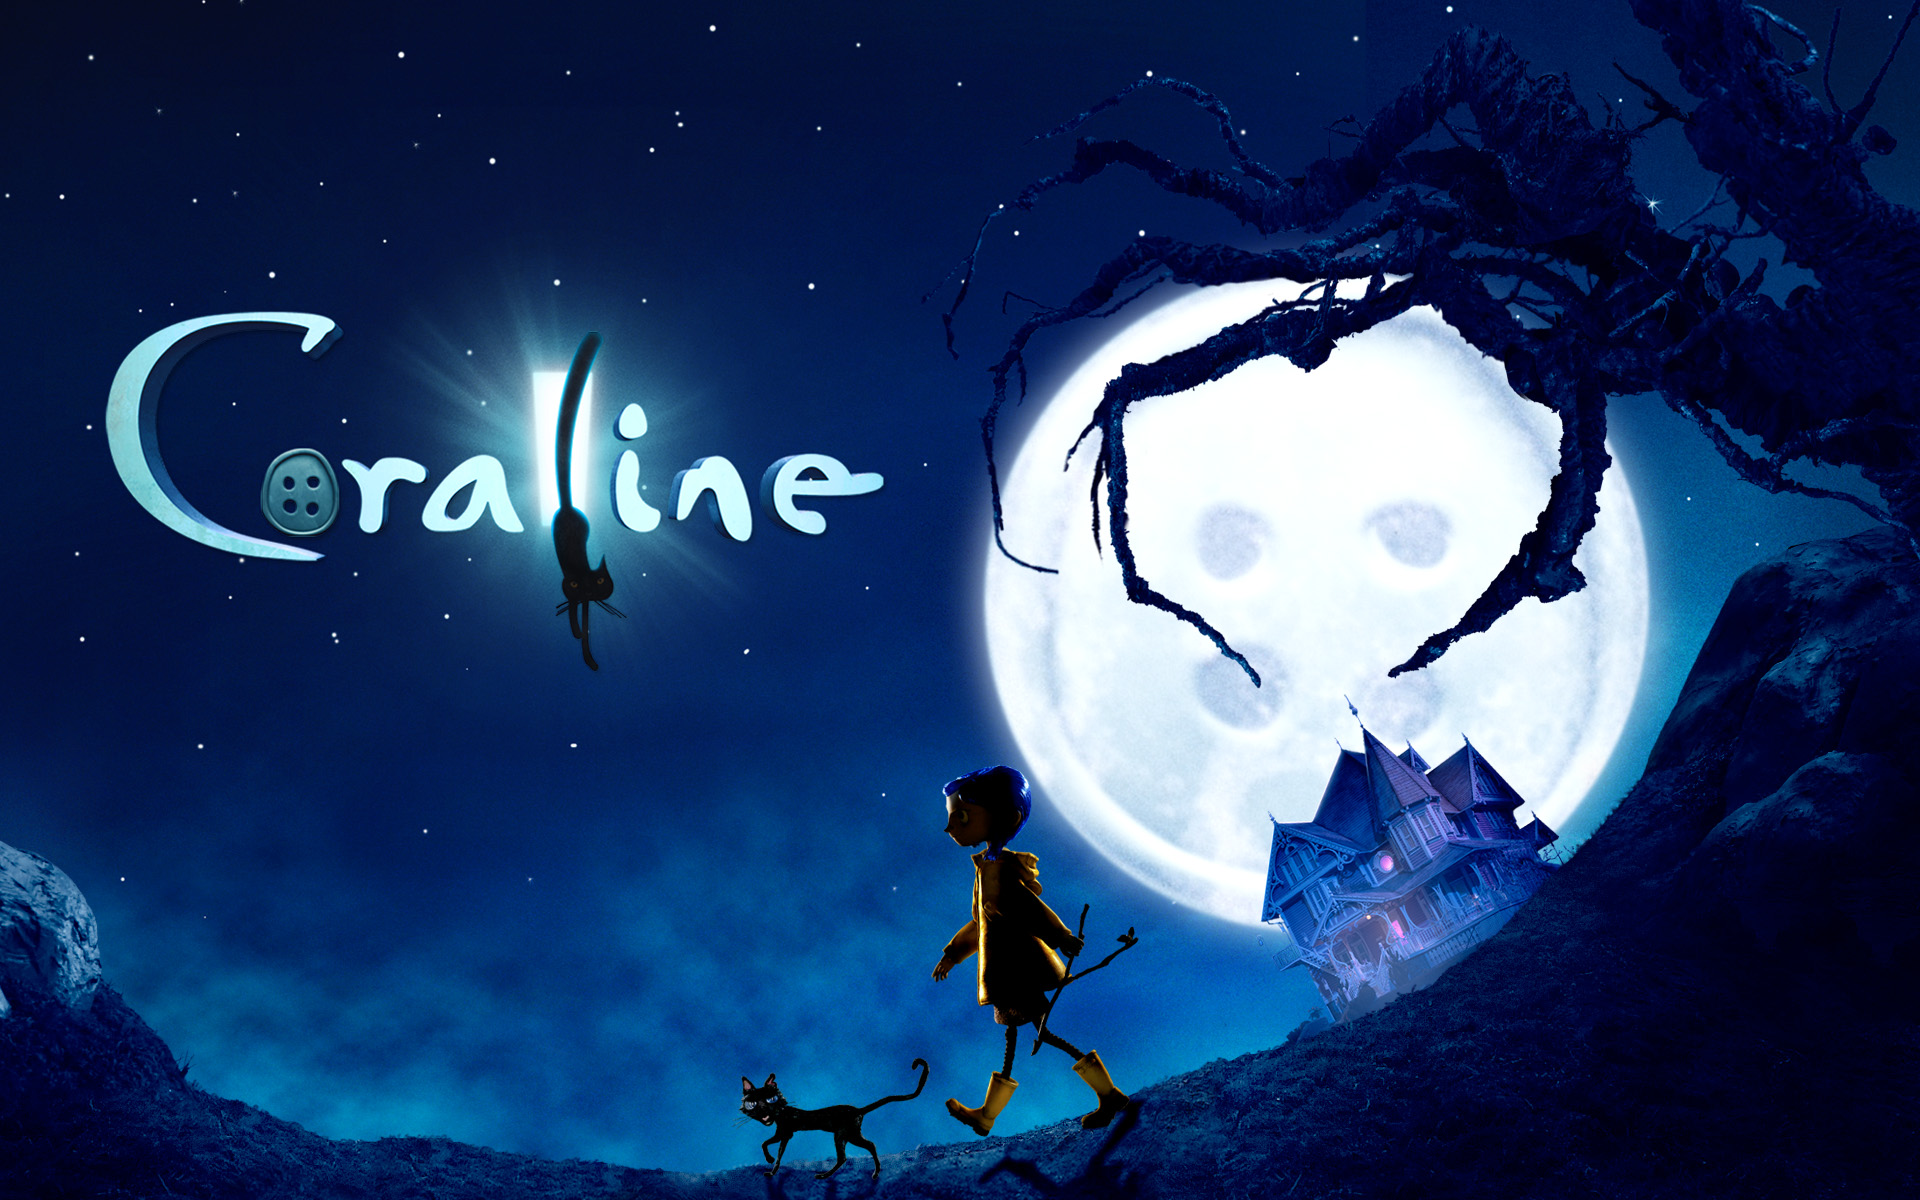 Coraline Wallpapers High Quality | Download Free